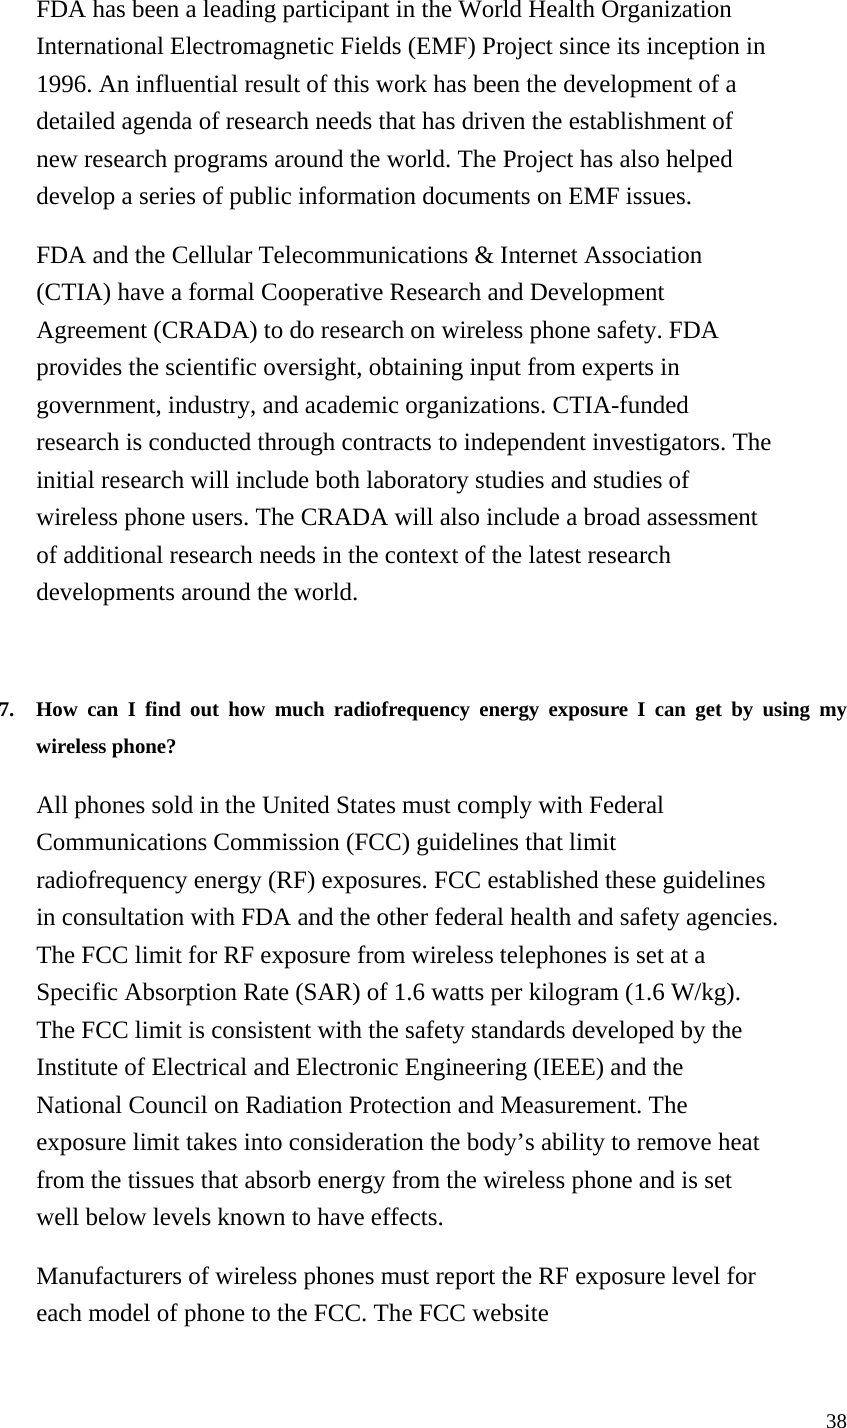 FDA has been a leading participant in the World Health Organization International Electromagnetic Fields (EMF) Project since its inception in 1996. An influential result of this work has been the development of a detailed agenda of research needs that has driven the establishment of new research programs around the world. The Project has also helped develop a series of public information documents on EMF issues. FDA and the Cellular Telecommunications &amp; Internet Association (CTIA) have a formal Cooperative Research and Development Agreement (CRADA) to do research on wireless phone safety. FDA provides the scientific oversight, obtaining input from experts in government, industry, and academic organizations. CTIA-funded research is conducted through contracts to independent investigators. The initial research will include both laboratory studies and studies of wireless phone users. The CRADA will also include a broad assessment of additional research needs in the context of the latest research developments around the world.   7.  How can I find out how much radiofrequency energy exposure I can get by using my wireless phone?   All phones sold in the United States must comply with Federal Communications Commission (FCC) guidelines that limit radiofrequency energy (RF) exposures. FCC established these guidelines in consultation with FDA and the other federal health and safety agencies. The FCC limit for RF exposure from wireless telephones is set at a Specific Absorption Rate (SAR) of 1.6 watts per kilogram (1.6 W/kg). The FCC limit is consistent with the safety standards developed by the Institute of Electrical and Electronic Engineering (IEEE) and the National Council on Radiation Protection and Measurement. The exposure limit takes into consideration the body’s ability to remove heat from the tissues that absorb energy from the wireless phone and is set well below levels known to have effects. Manufacturers of wireless phones must report the RF exposure level for each model of phone to the FCC. The FCC website 38 